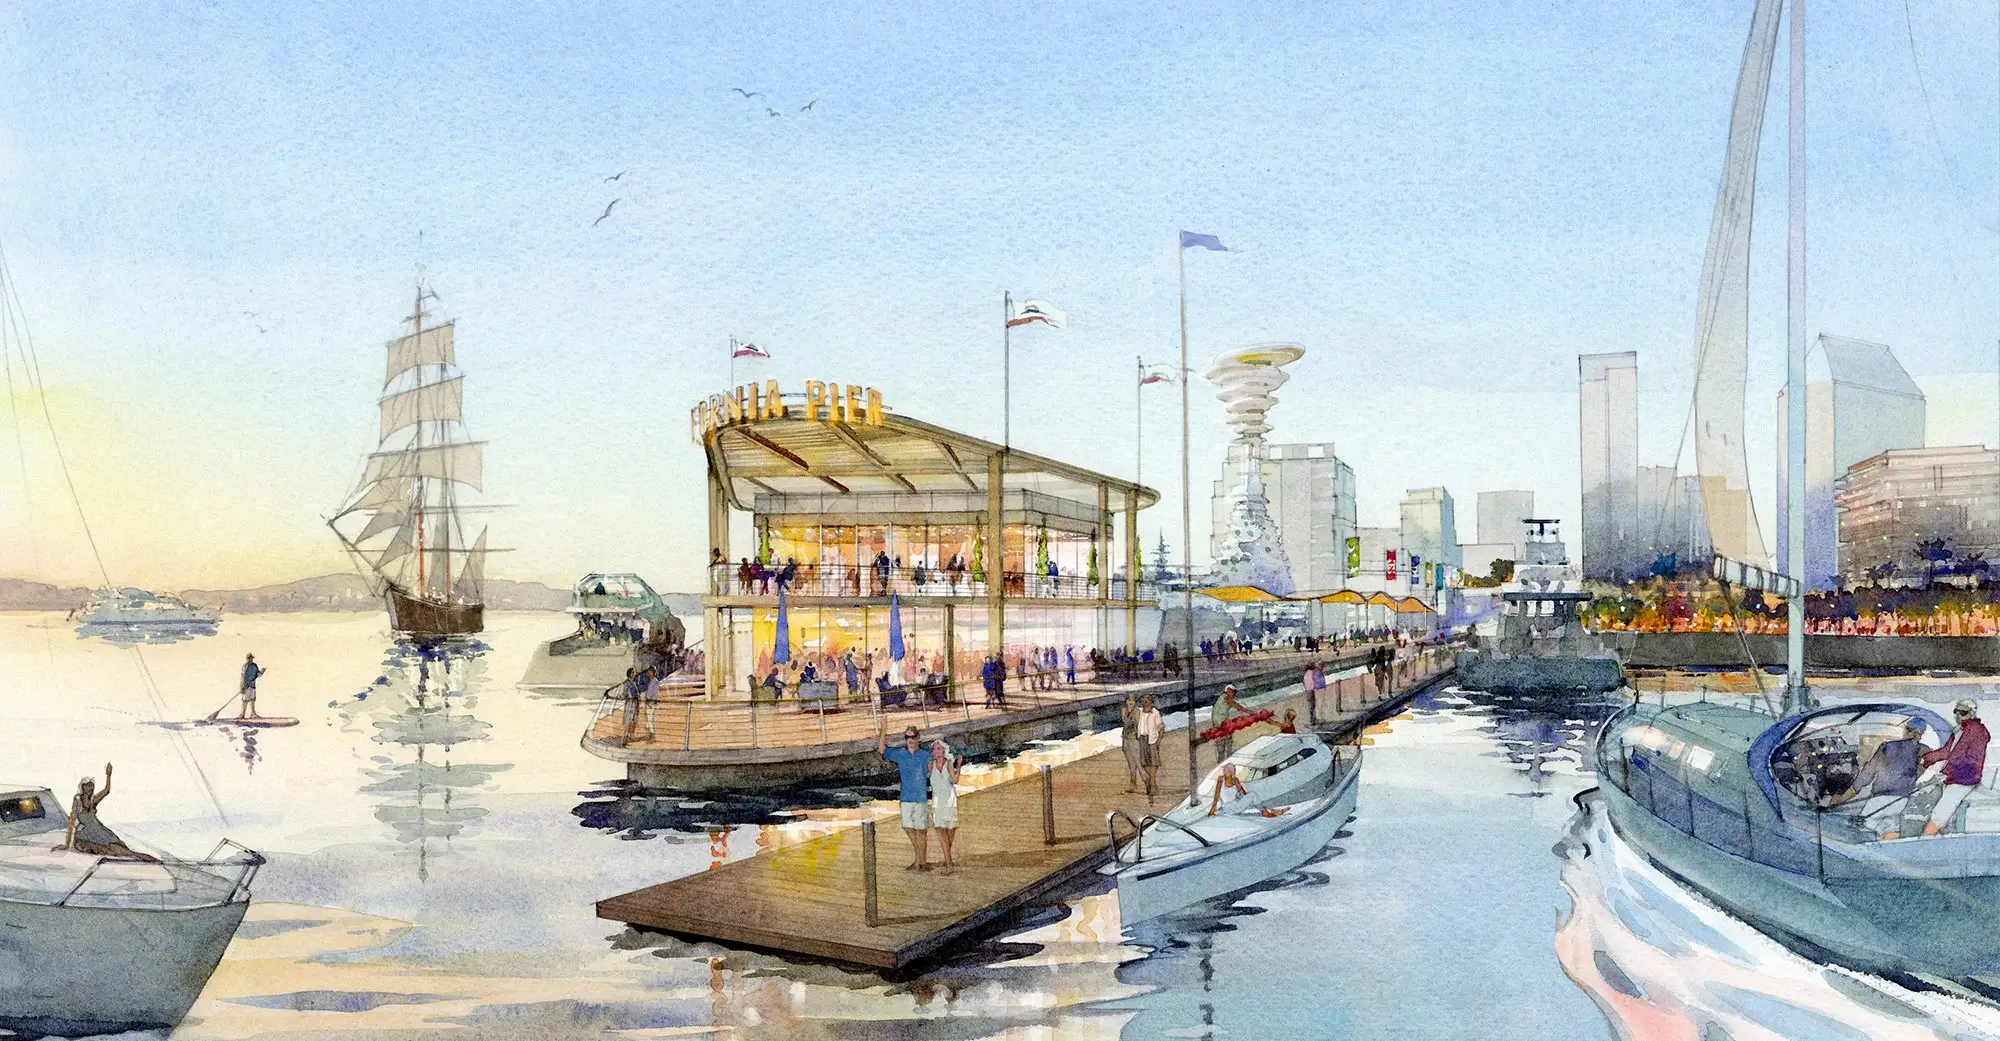 Artist rendering of boats in the bay at sunset beside the California Pier